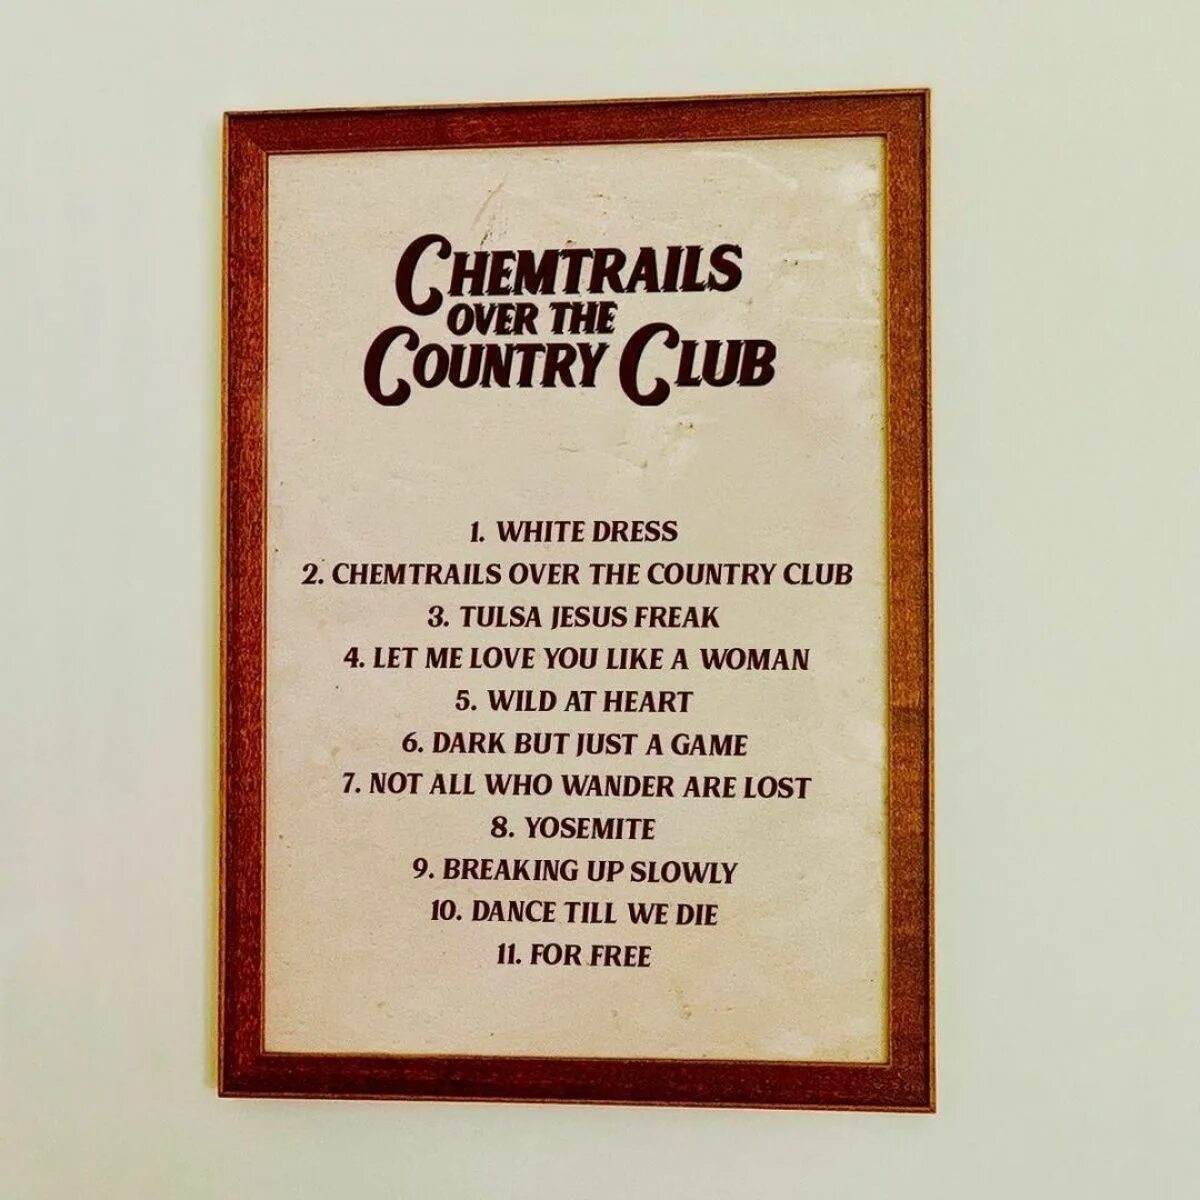 Country club песня. Chemtrails over the Country Club. Lana del Rey Chemtrails over the Country Club album. Lana del Rey Chemtrails over the Country Club 2021.